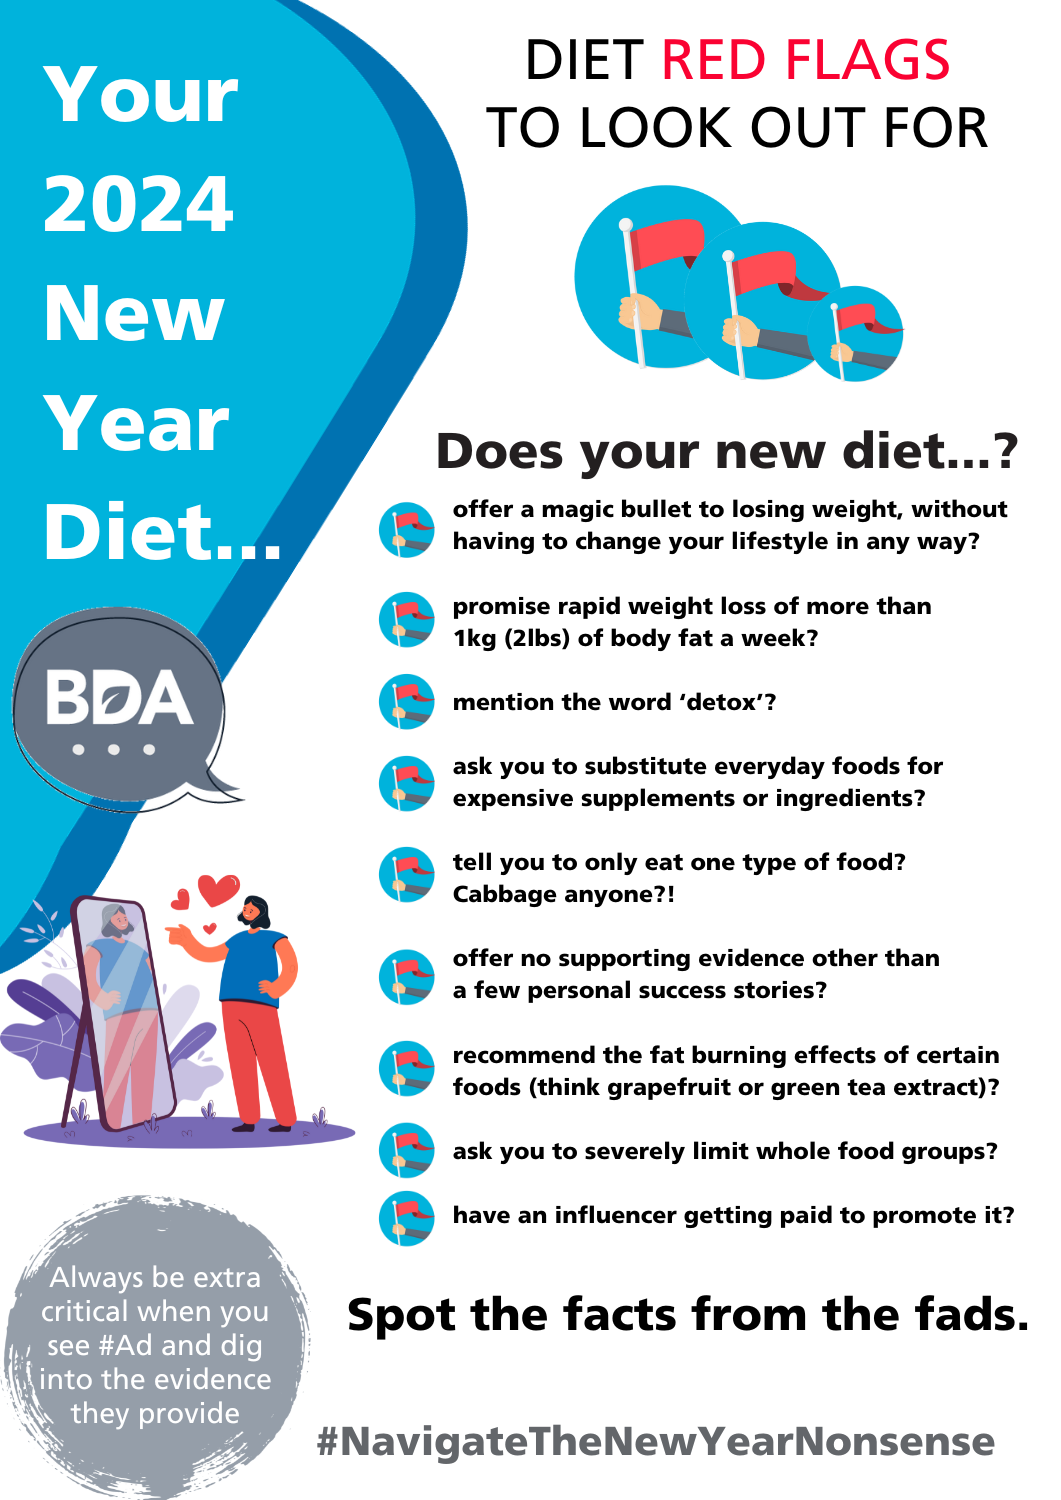 DIET RED FLAGS TO LOOK OUT FOR 2024 poster thumbnail